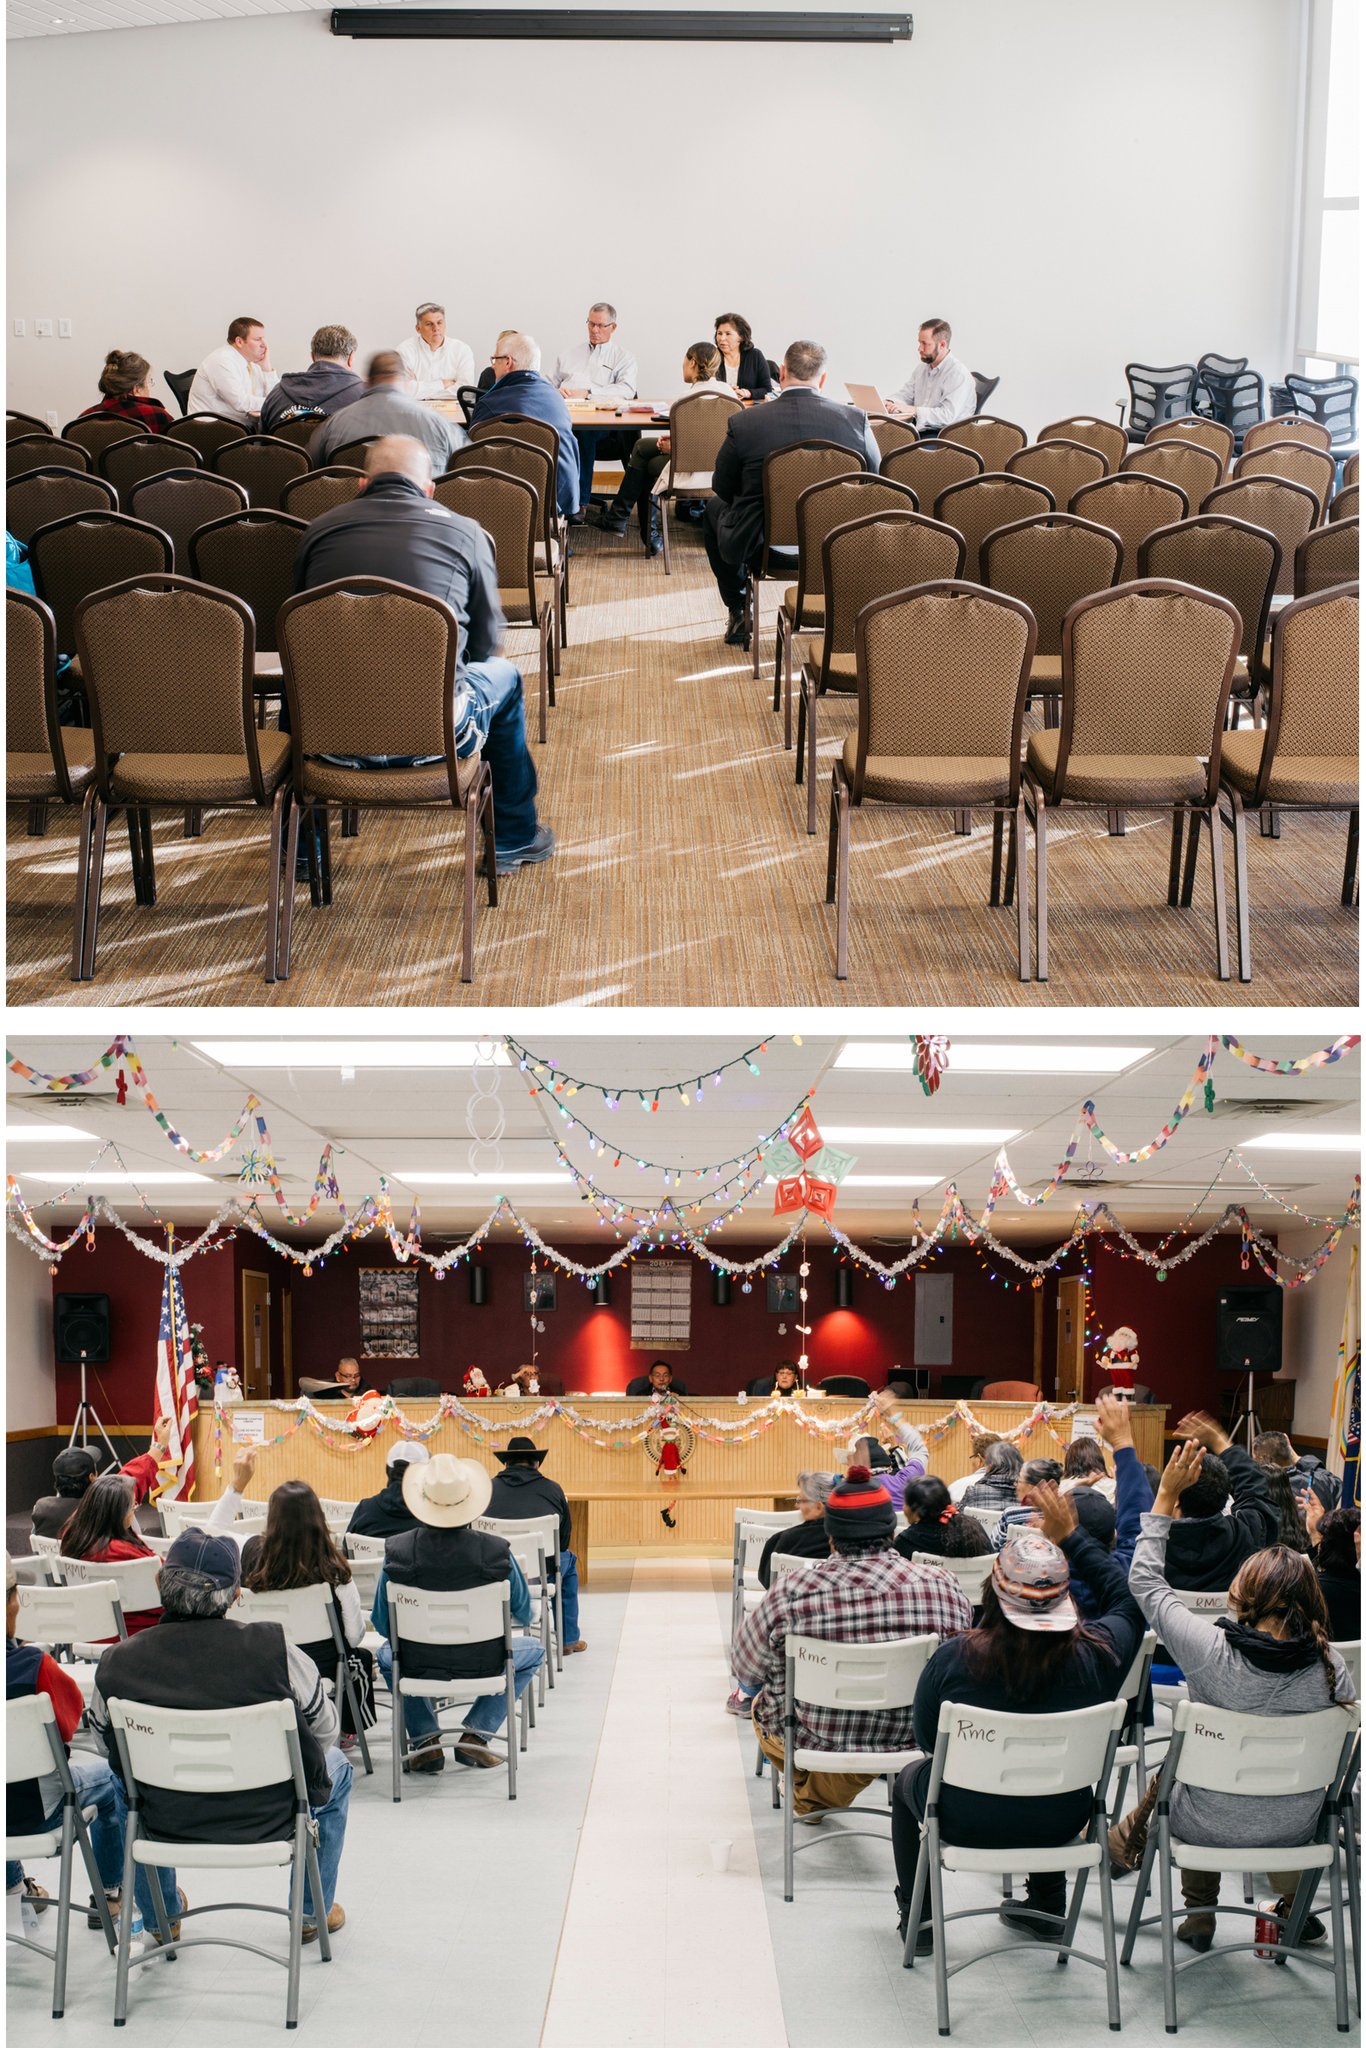 Top, San Juan County commissioners at a meeting in the north; below, a Navajo meeting in the south. Credit Benjamin Rasmussen for The New York Times